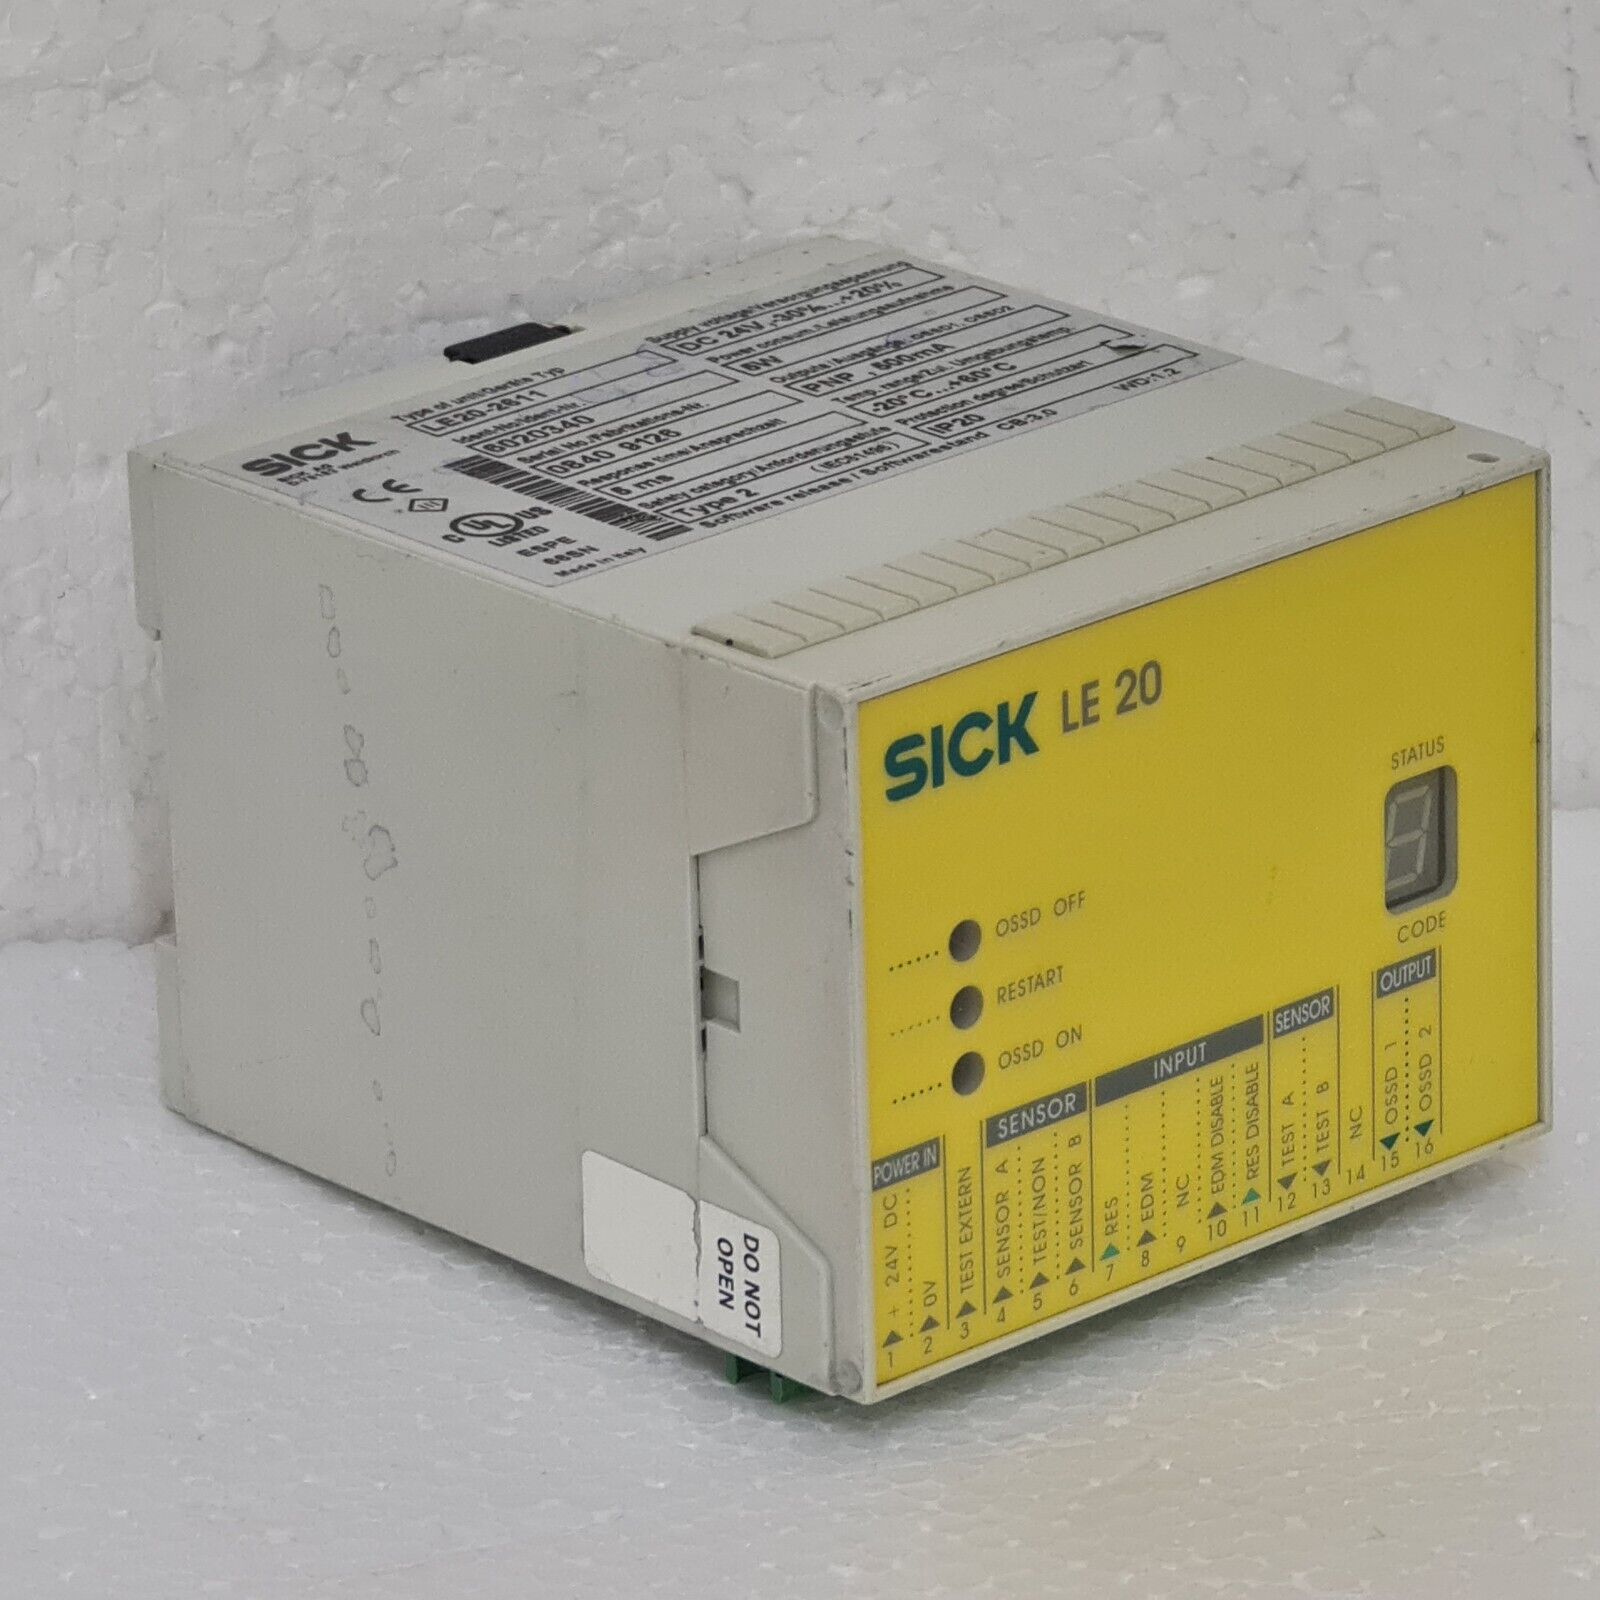 SICK LE20-2611 Safety Switching Amplifier Ident-No: 6020340